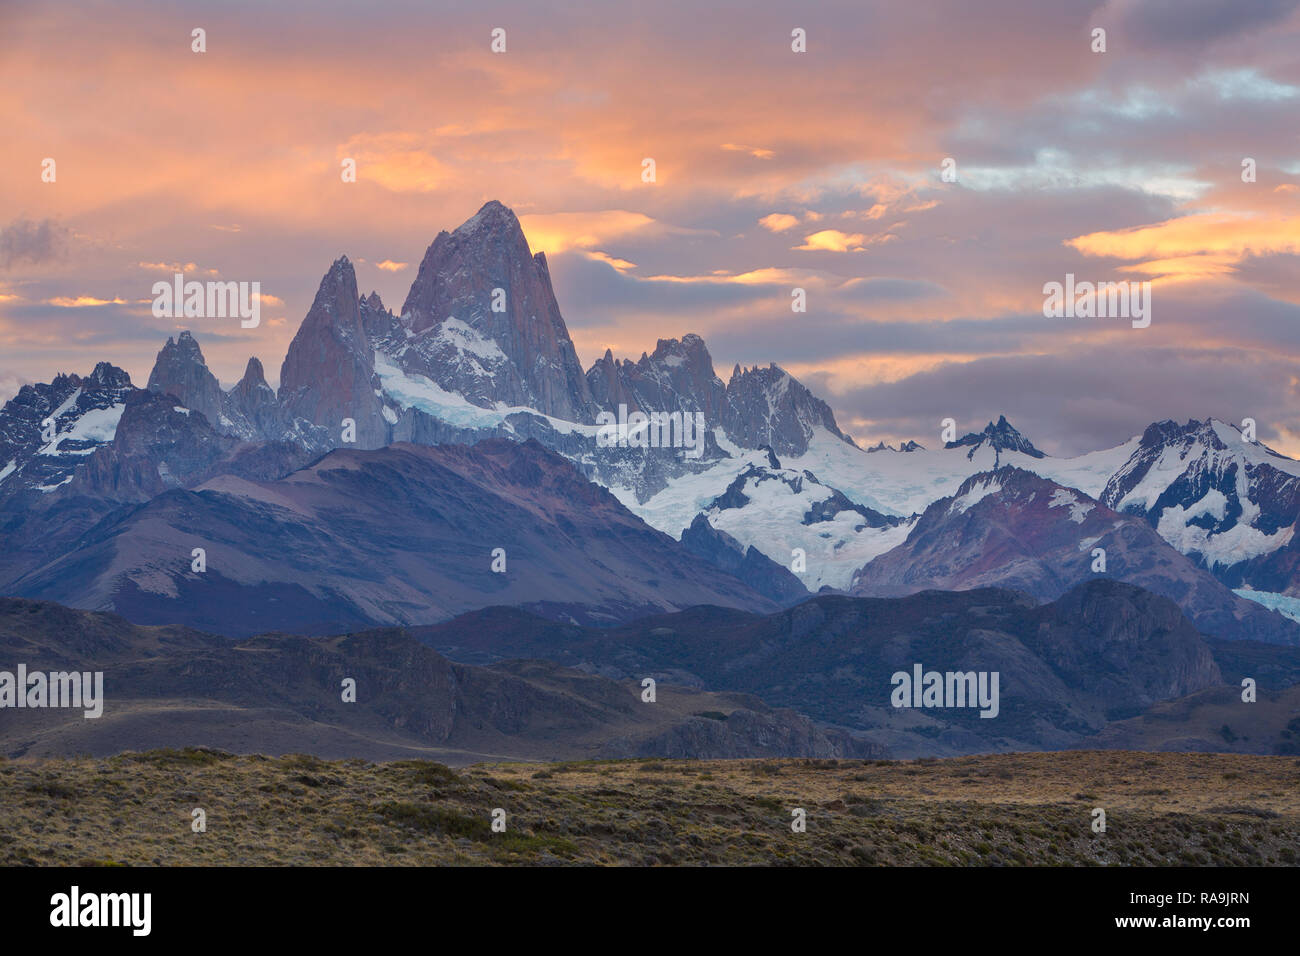 Sunset over Mount Fitz Roy in Argentina. Stock Photo